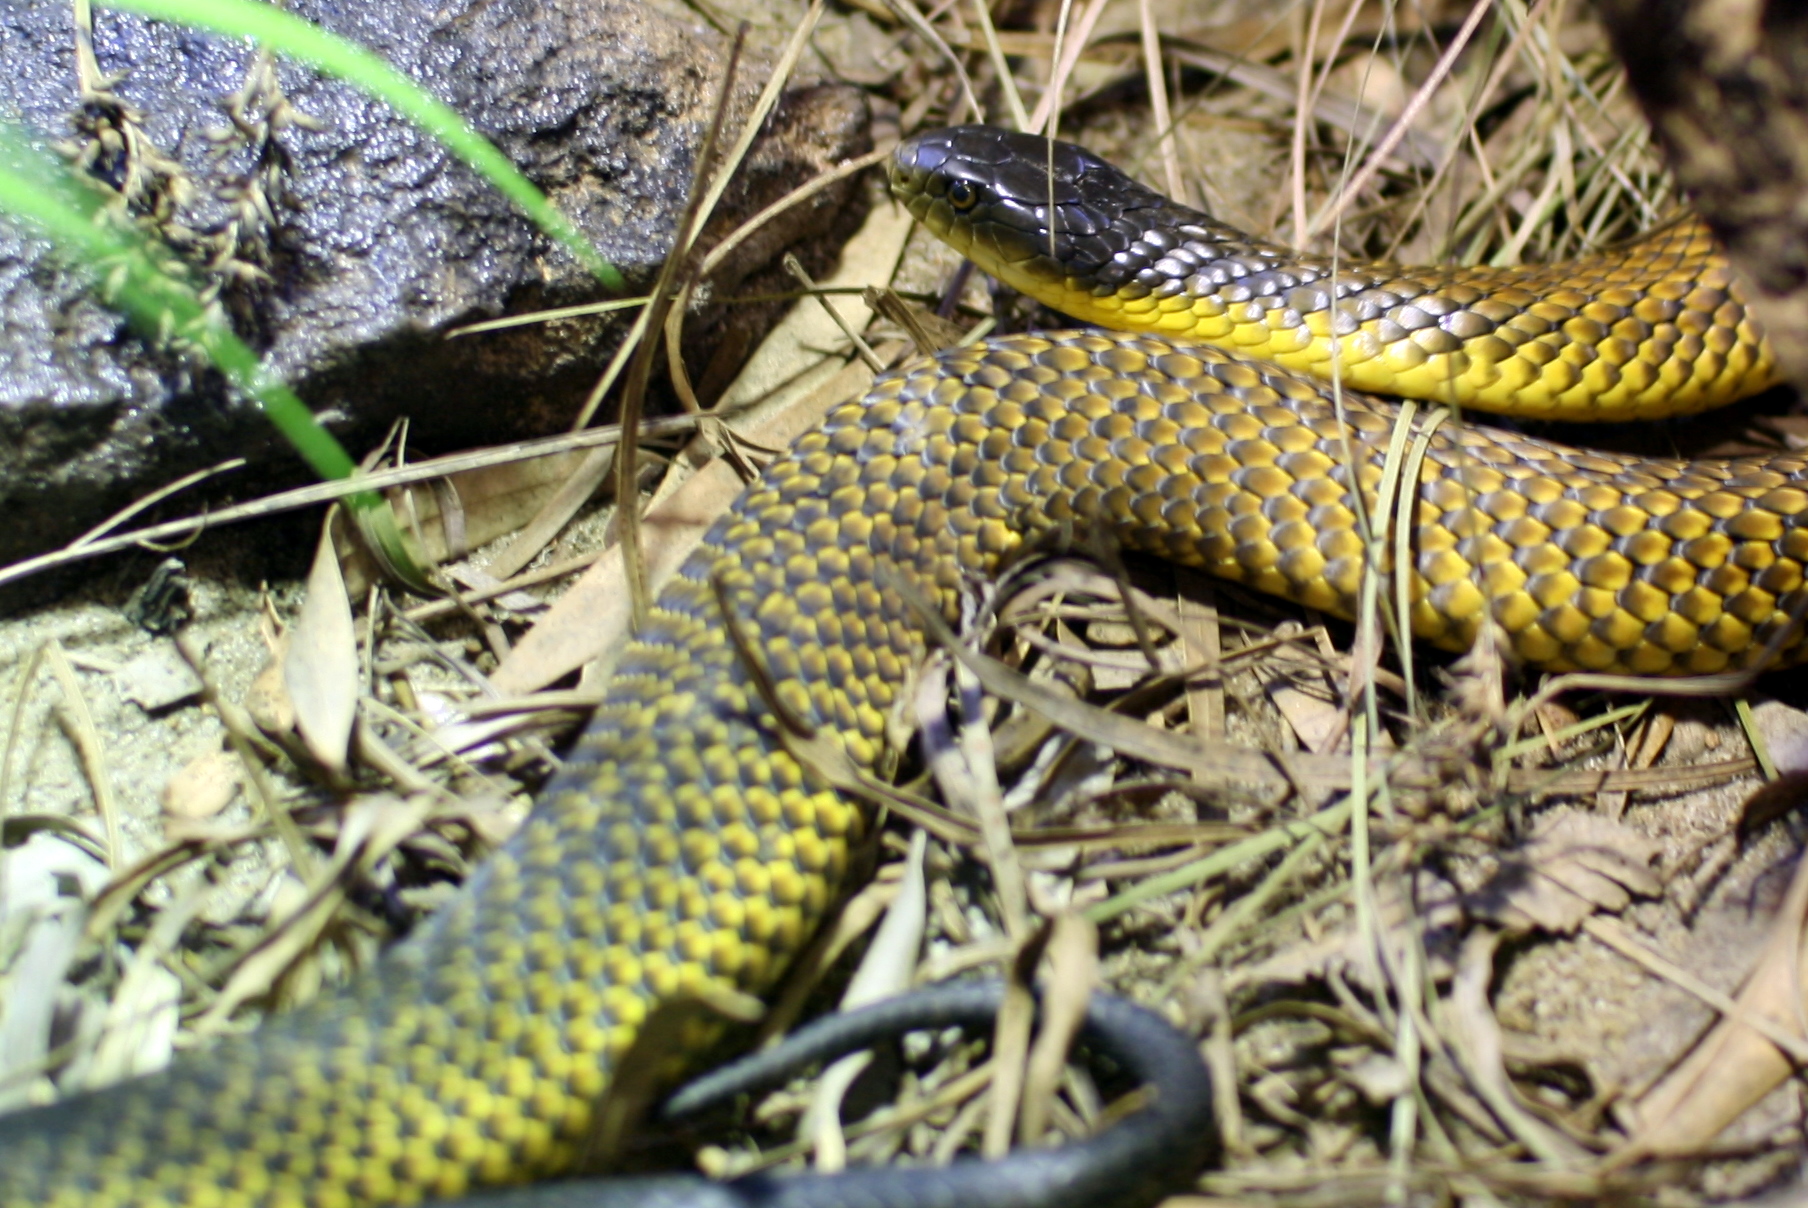 a green snake with brown and yellow stripes laying in the grass